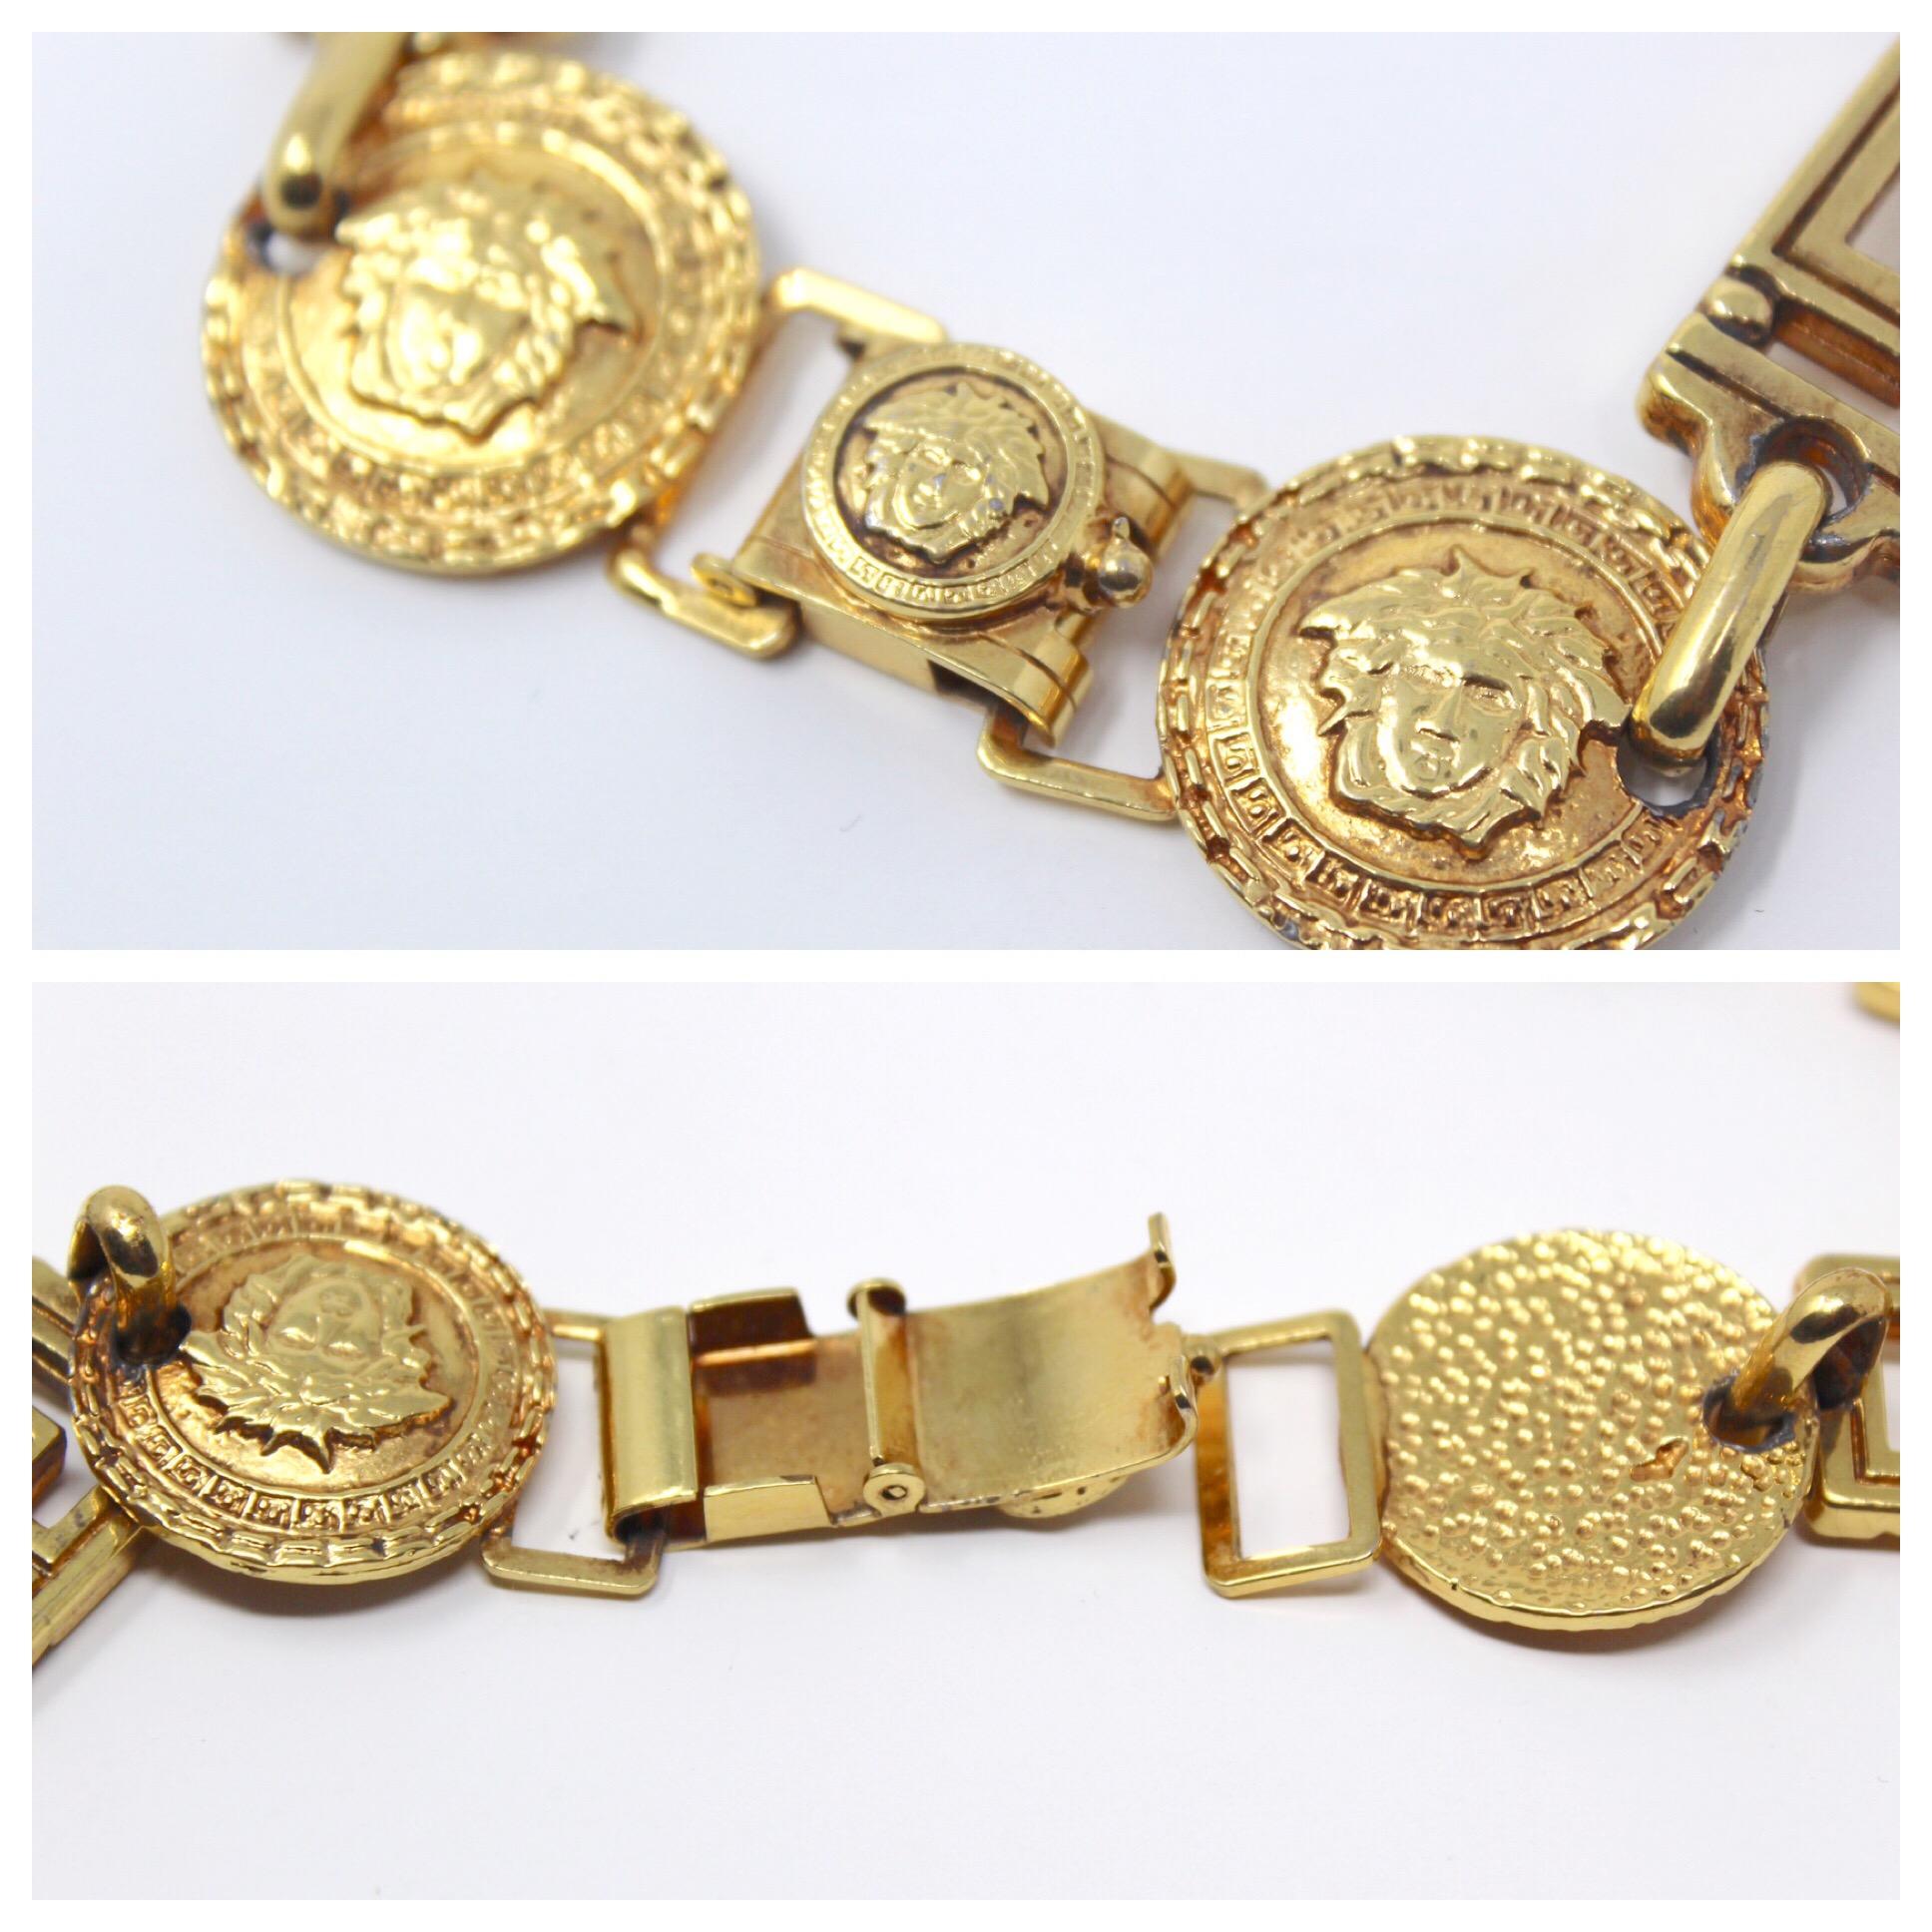 Gianni Versace Gold Medusa & Greek Key Choker, c. 90's  In Good Condition For Sale In Los Angeles, CA